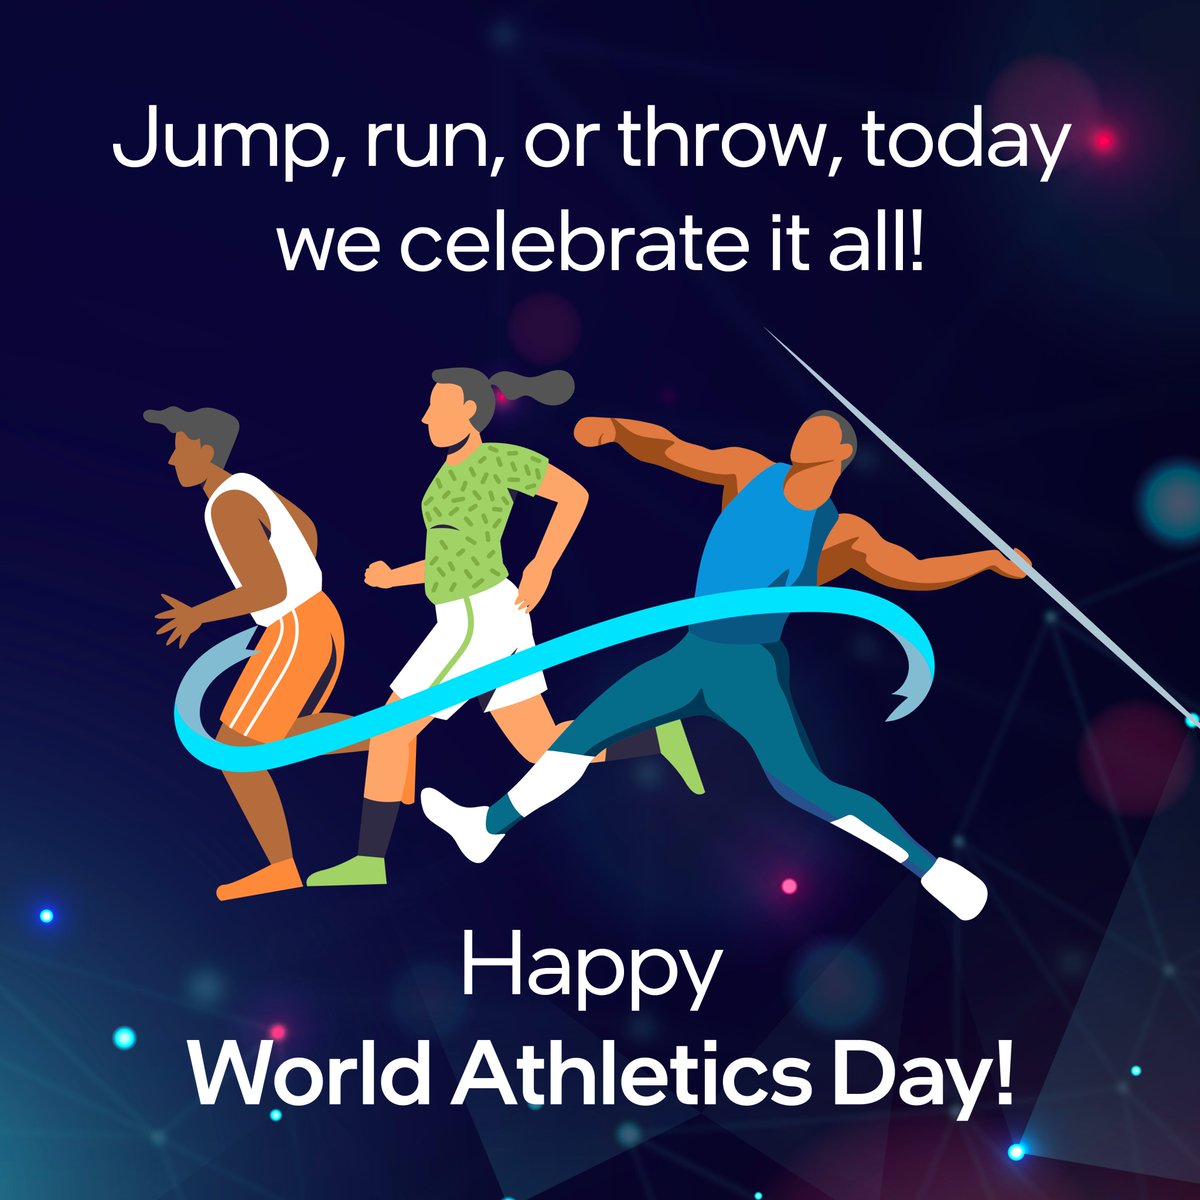 On your marks, get set, go! This World Athletics Day, we're celebrating every start, every stride, every finish. What's your personal best moment? Share in the comments below! #AI4Youth #AIready #DigitalReadiness #WorldAthleticsDay